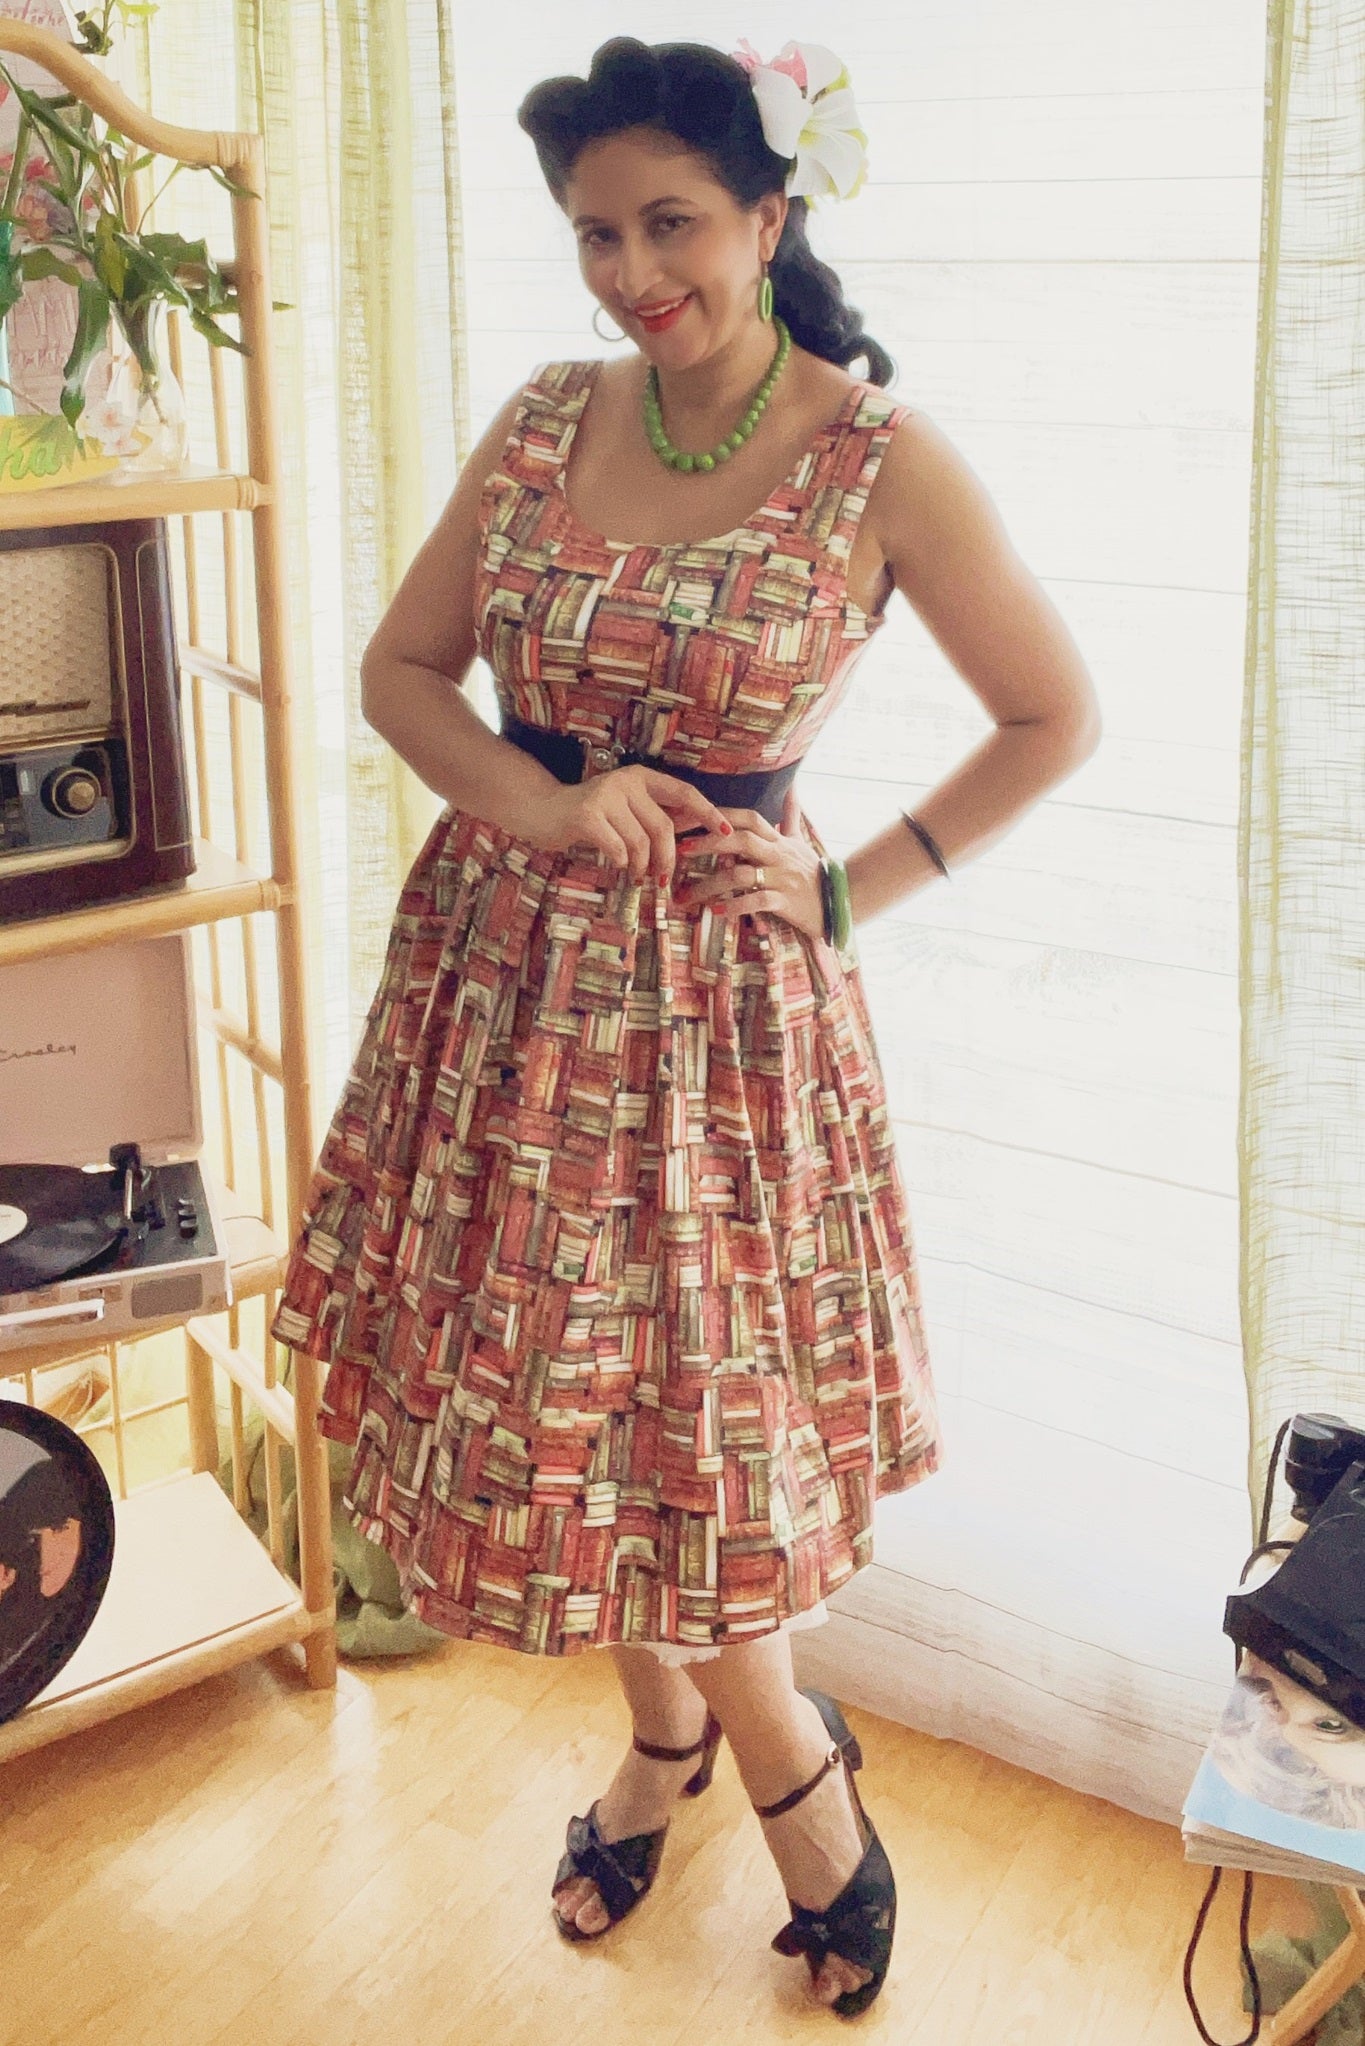 Customer wears our sleeveless swing dress, in library book print, with vintage technology around